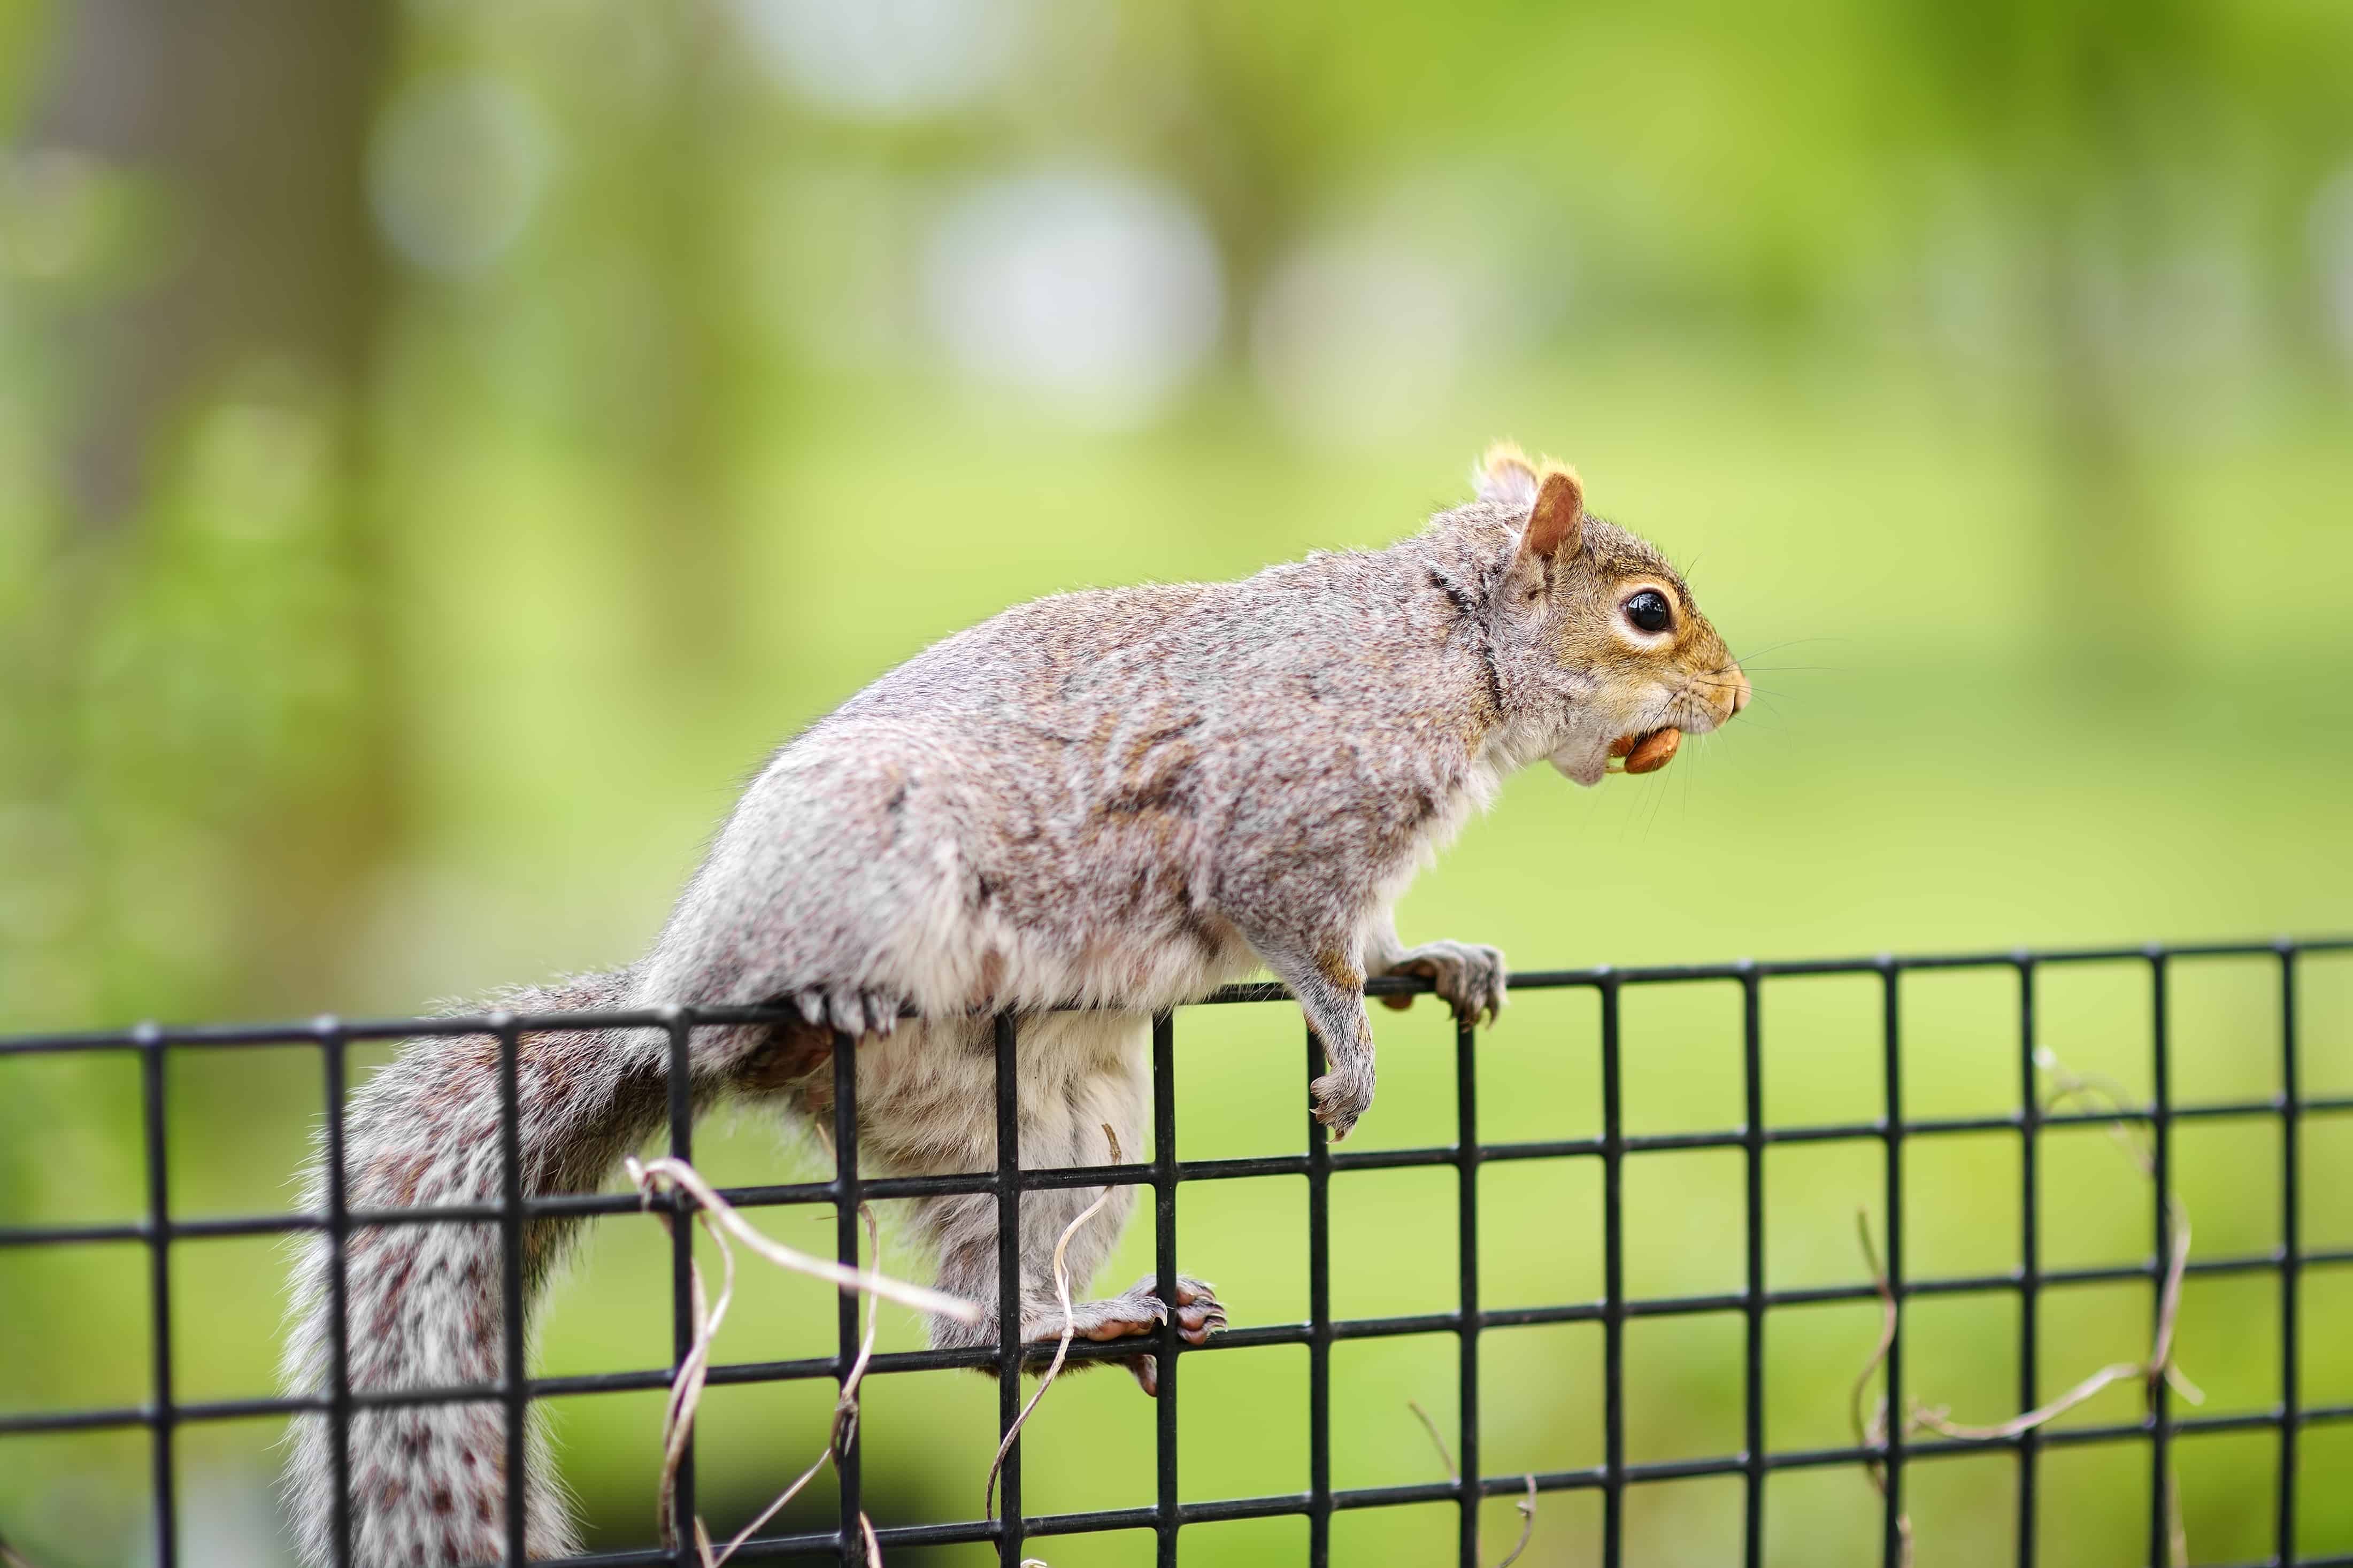 A grey squirrel crawling at the fence with nut on its mouth